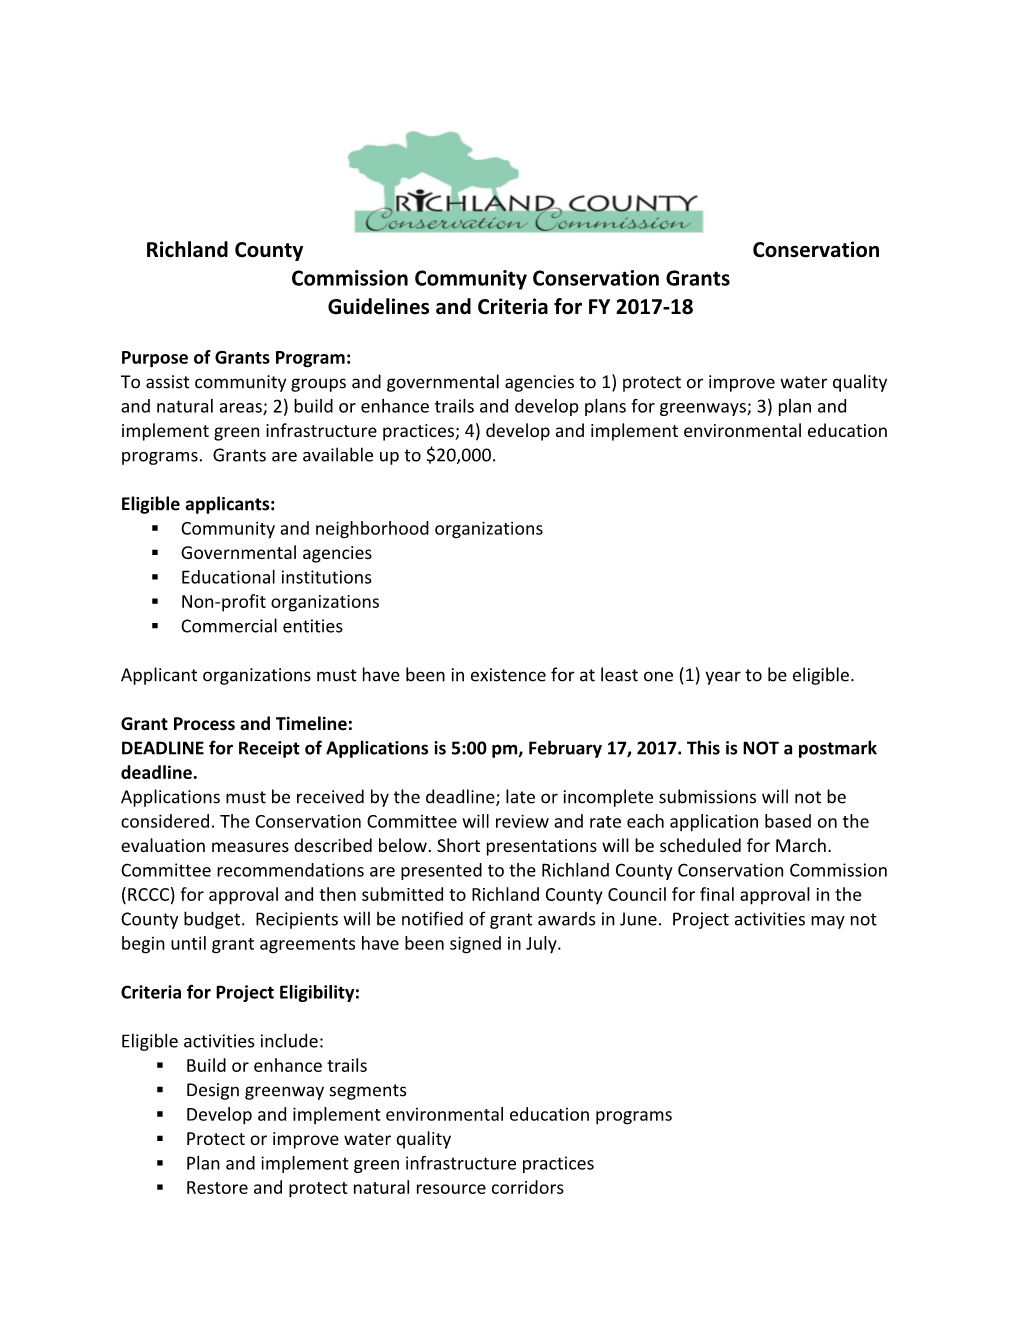 Richland County Conservation Commission Community Conservation Grants